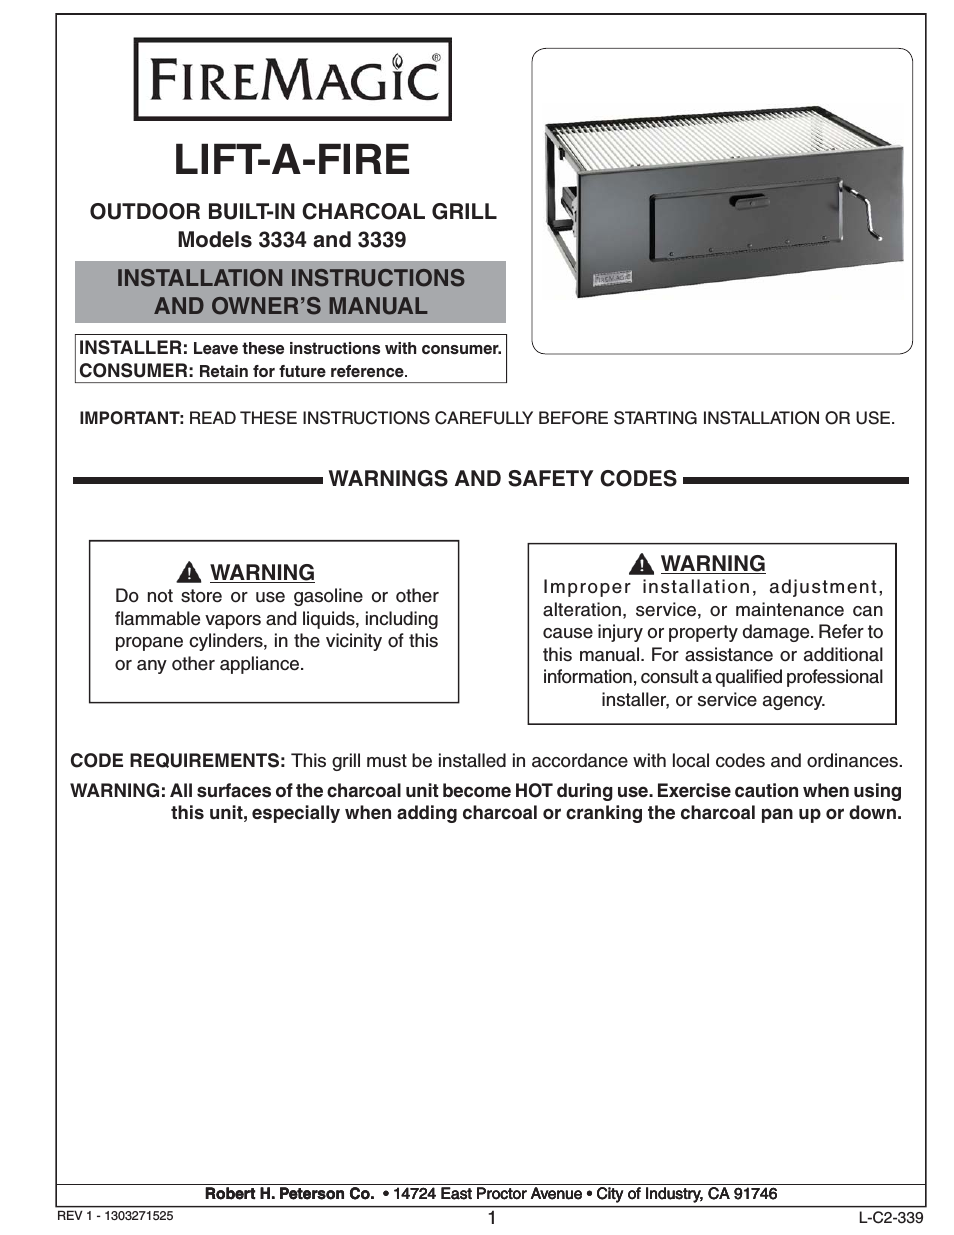 Lift-A-Fire Built-in Charcoal Grill 3334